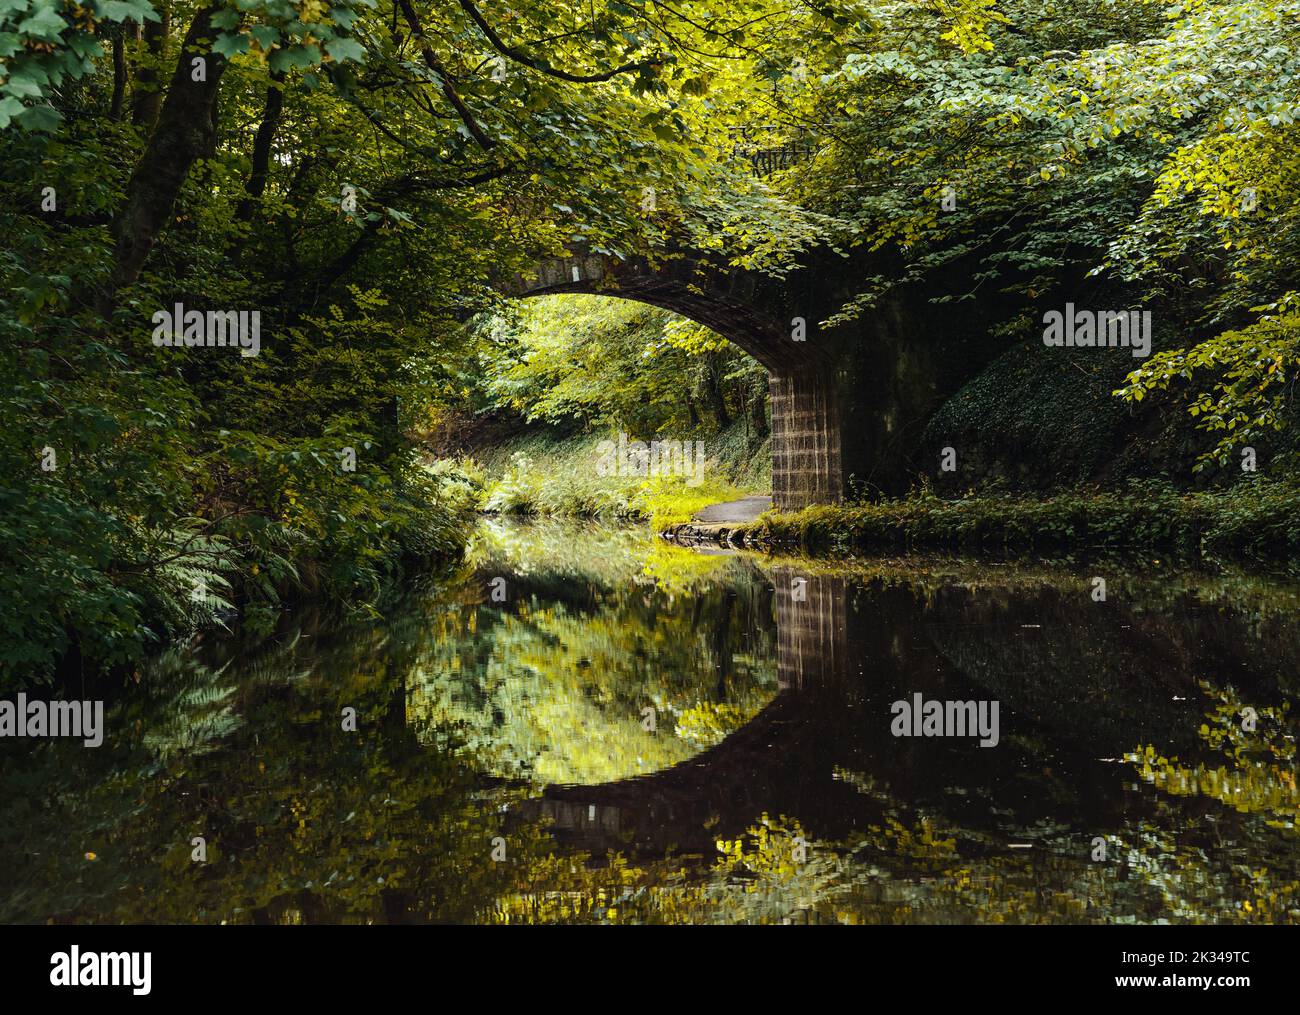 An arched stone bridge reflected in water on the Union Canal, Scotland, UK Stock Photo